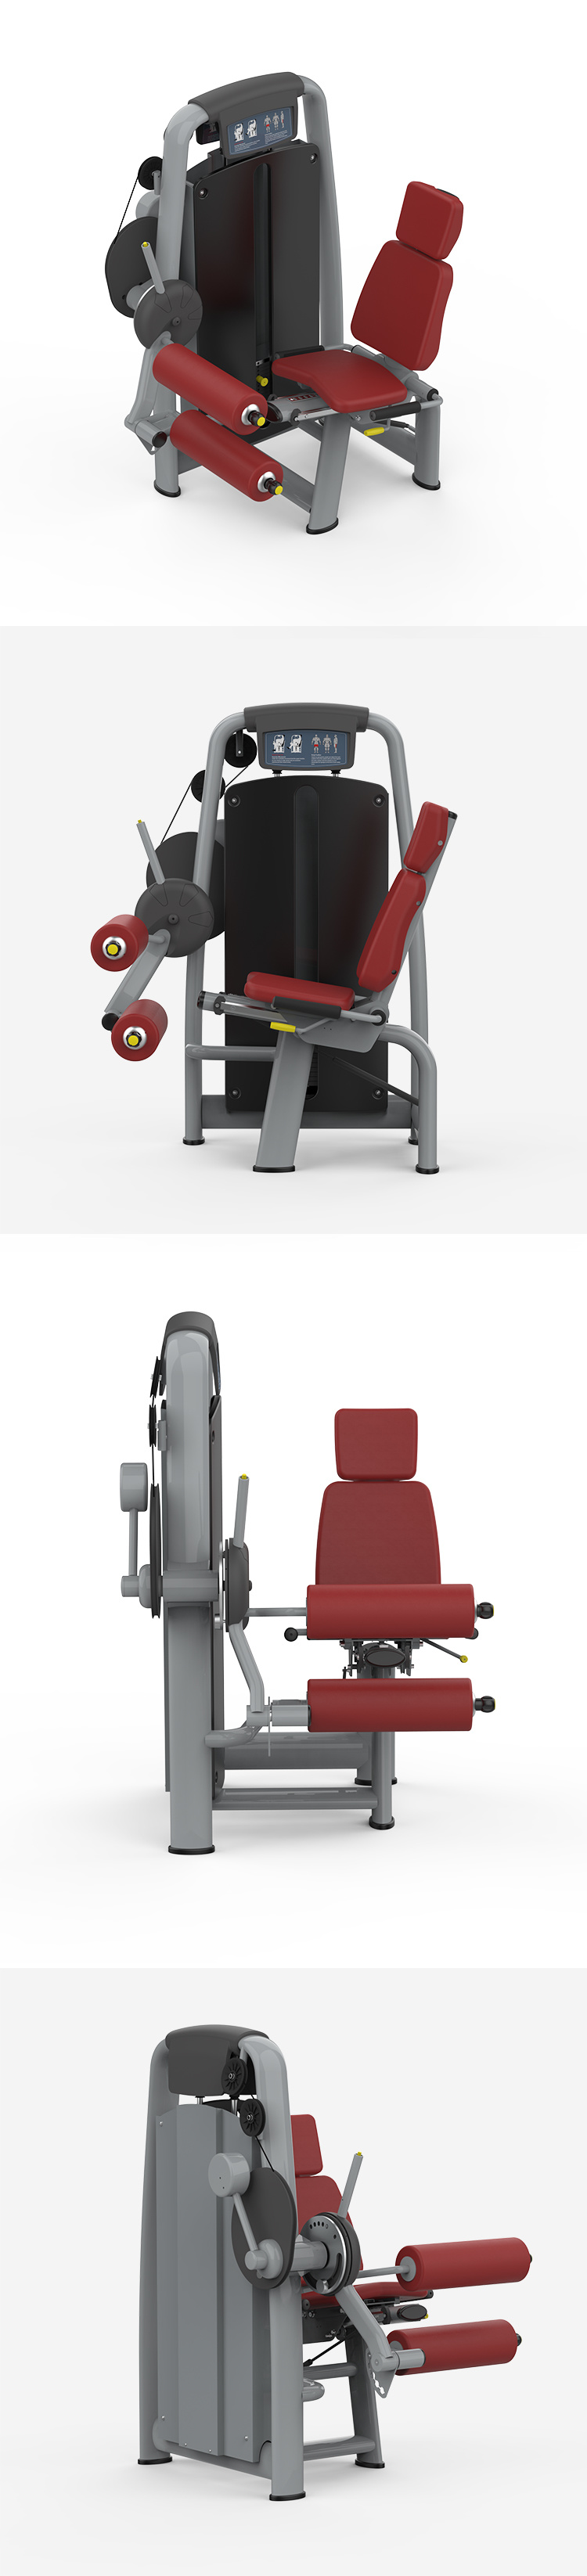 Fitness/Gym Equipment for Sale/Sports Equipment/Commercial Gym Equipment/Exercise Machine